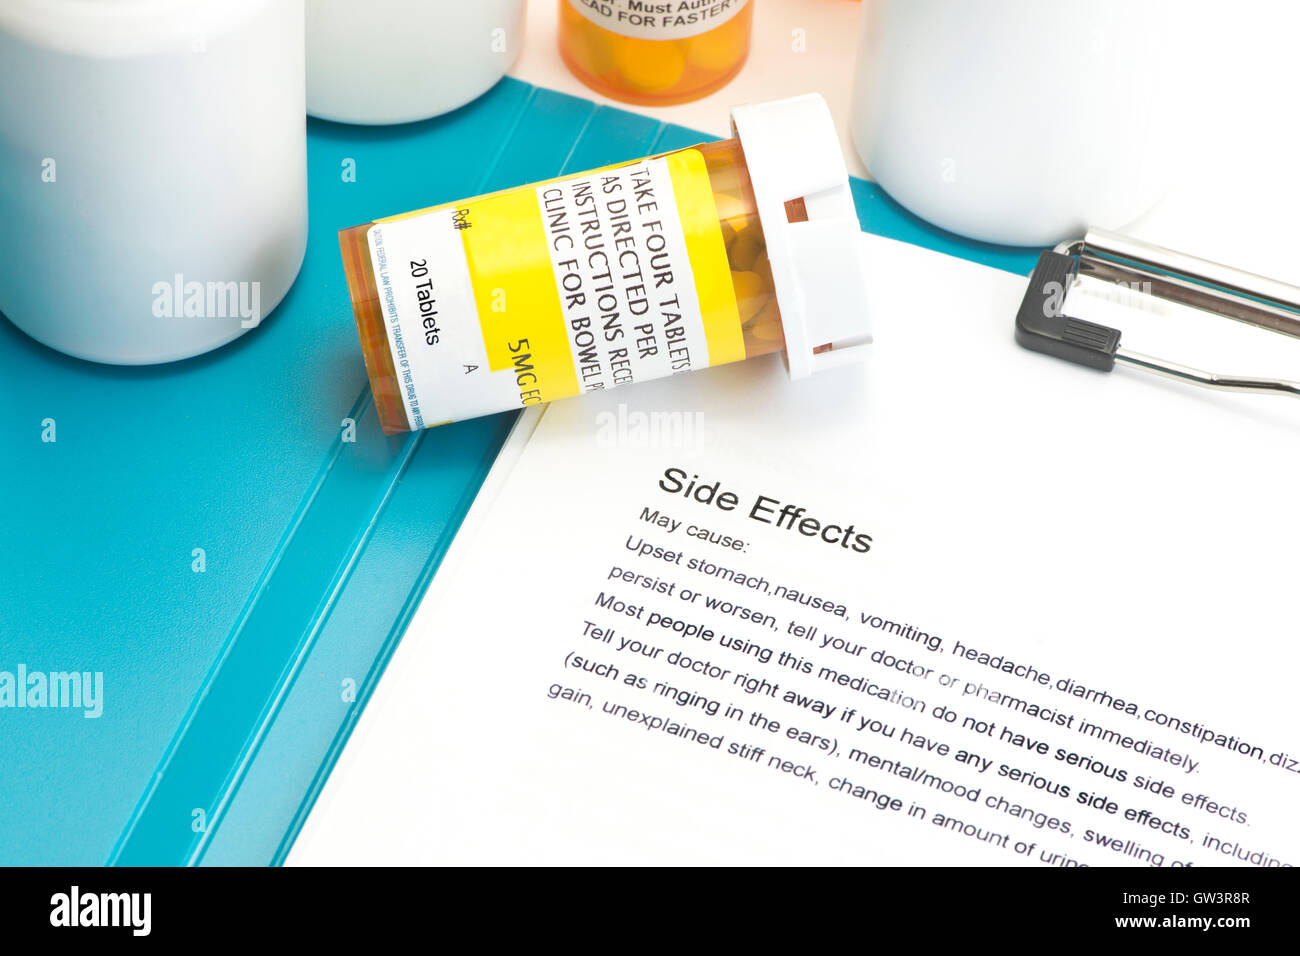 Prescription bottle with directions for use.  Labels and document are created by photographer. Stock Photo